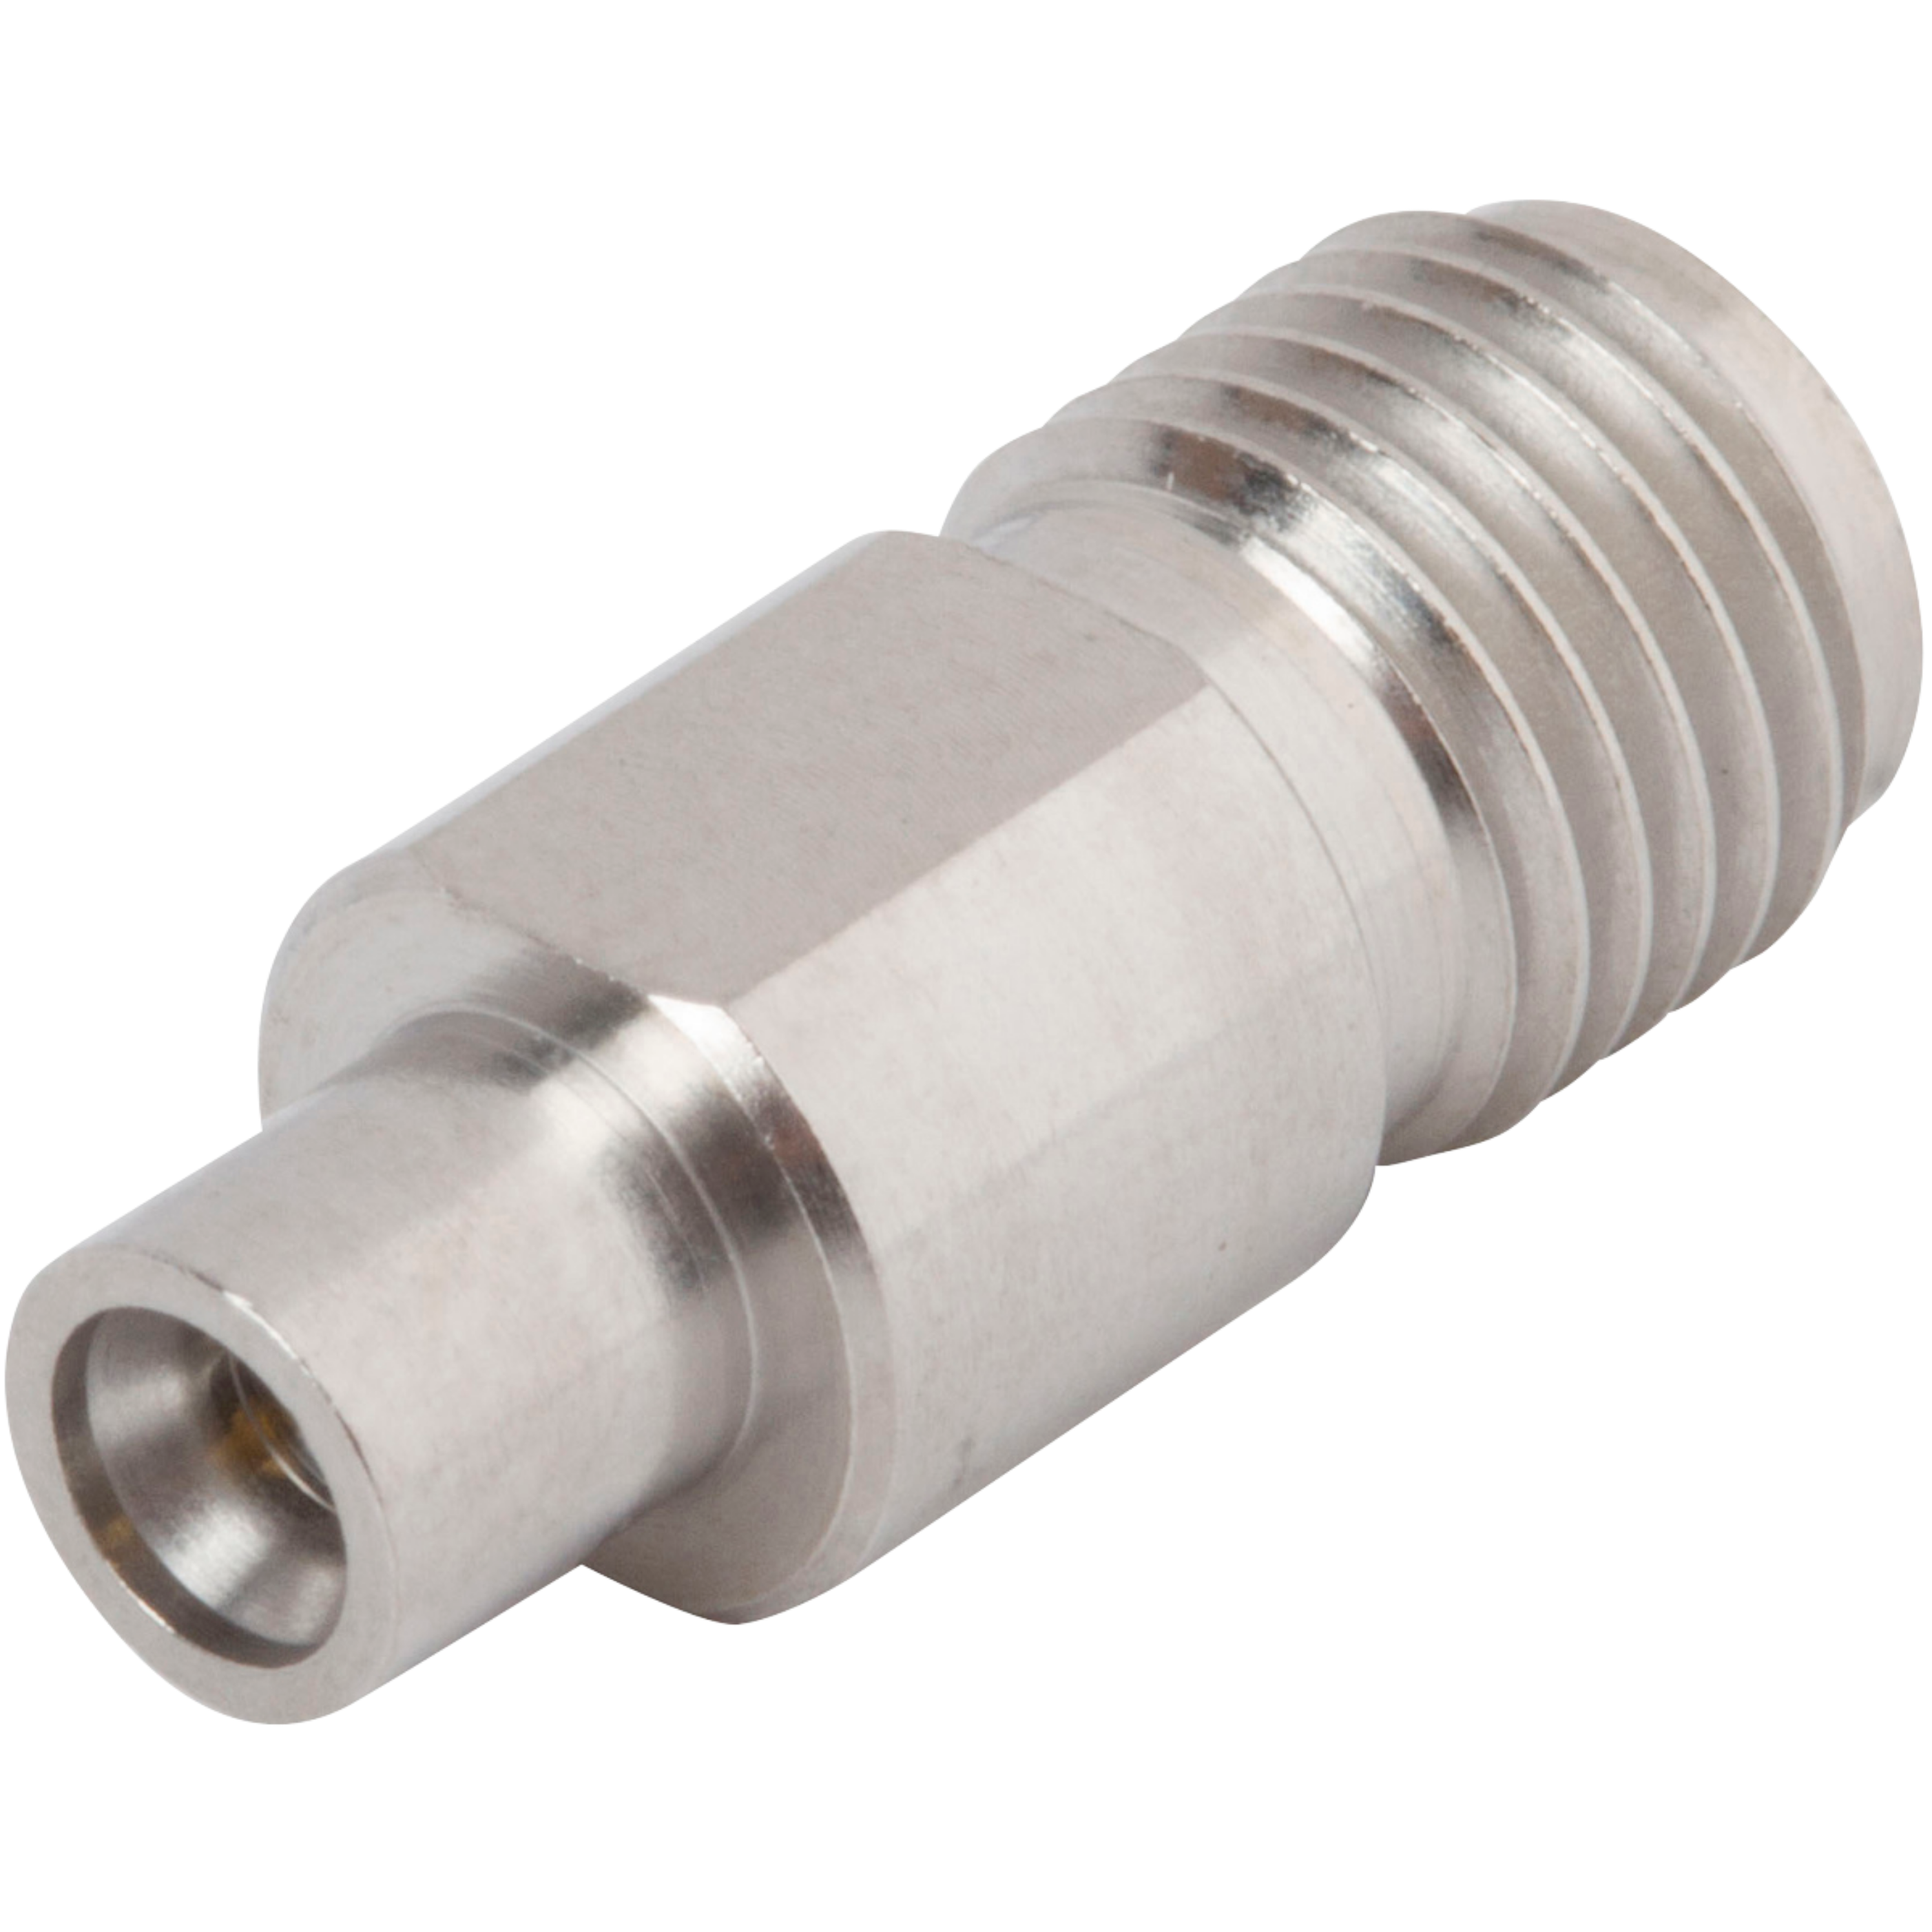 2.92mm Female to SMPM Male Adapter, FD, SF1115-6084